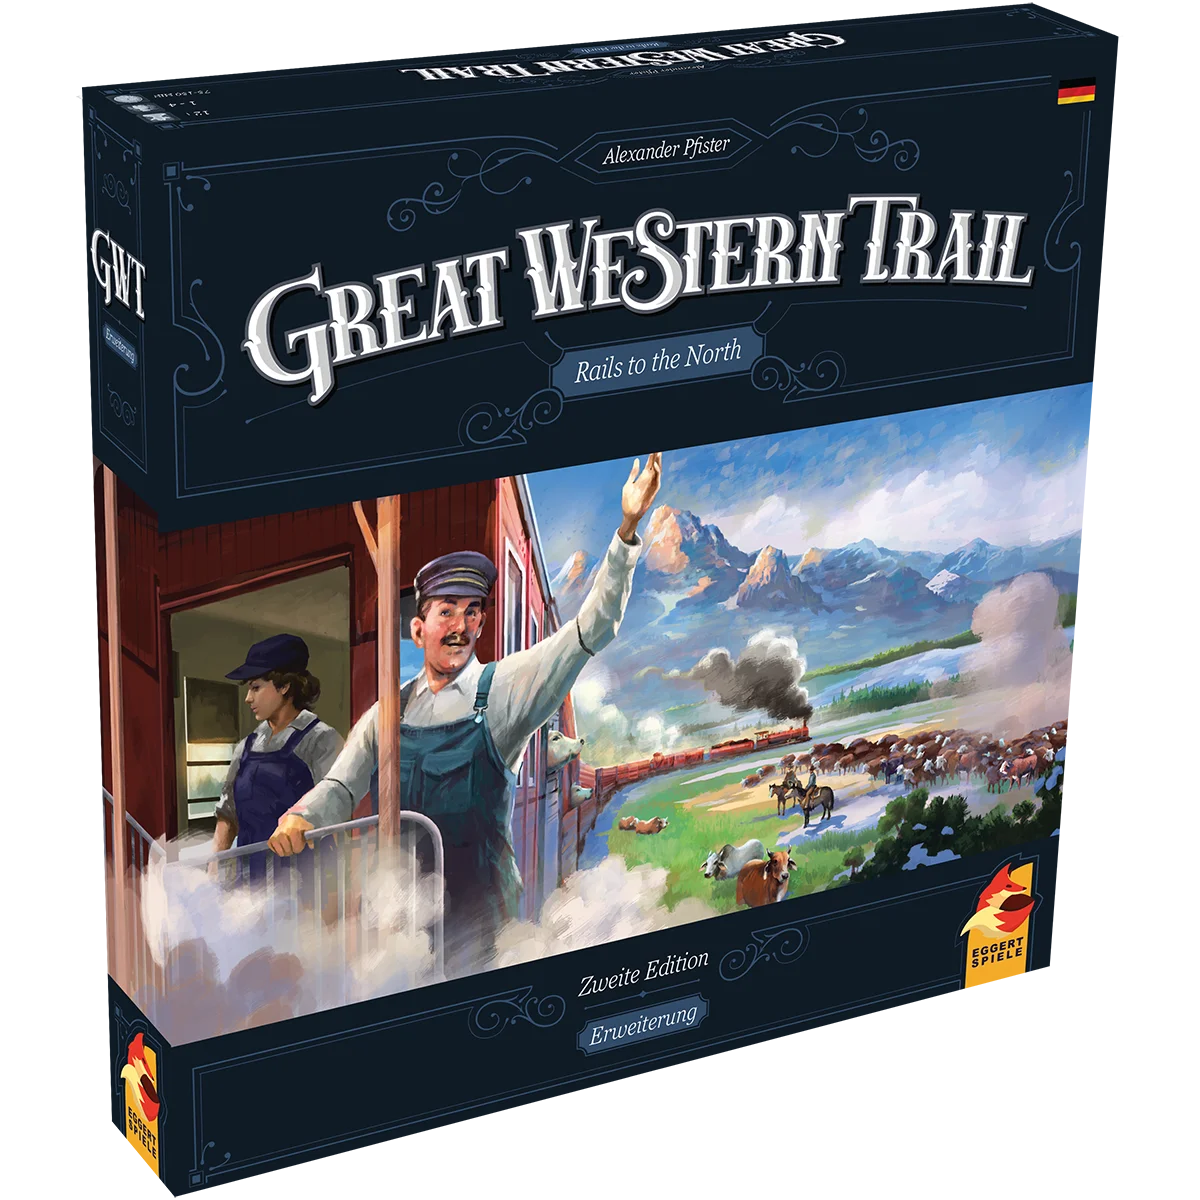 Great Western Trails - Rails to the North